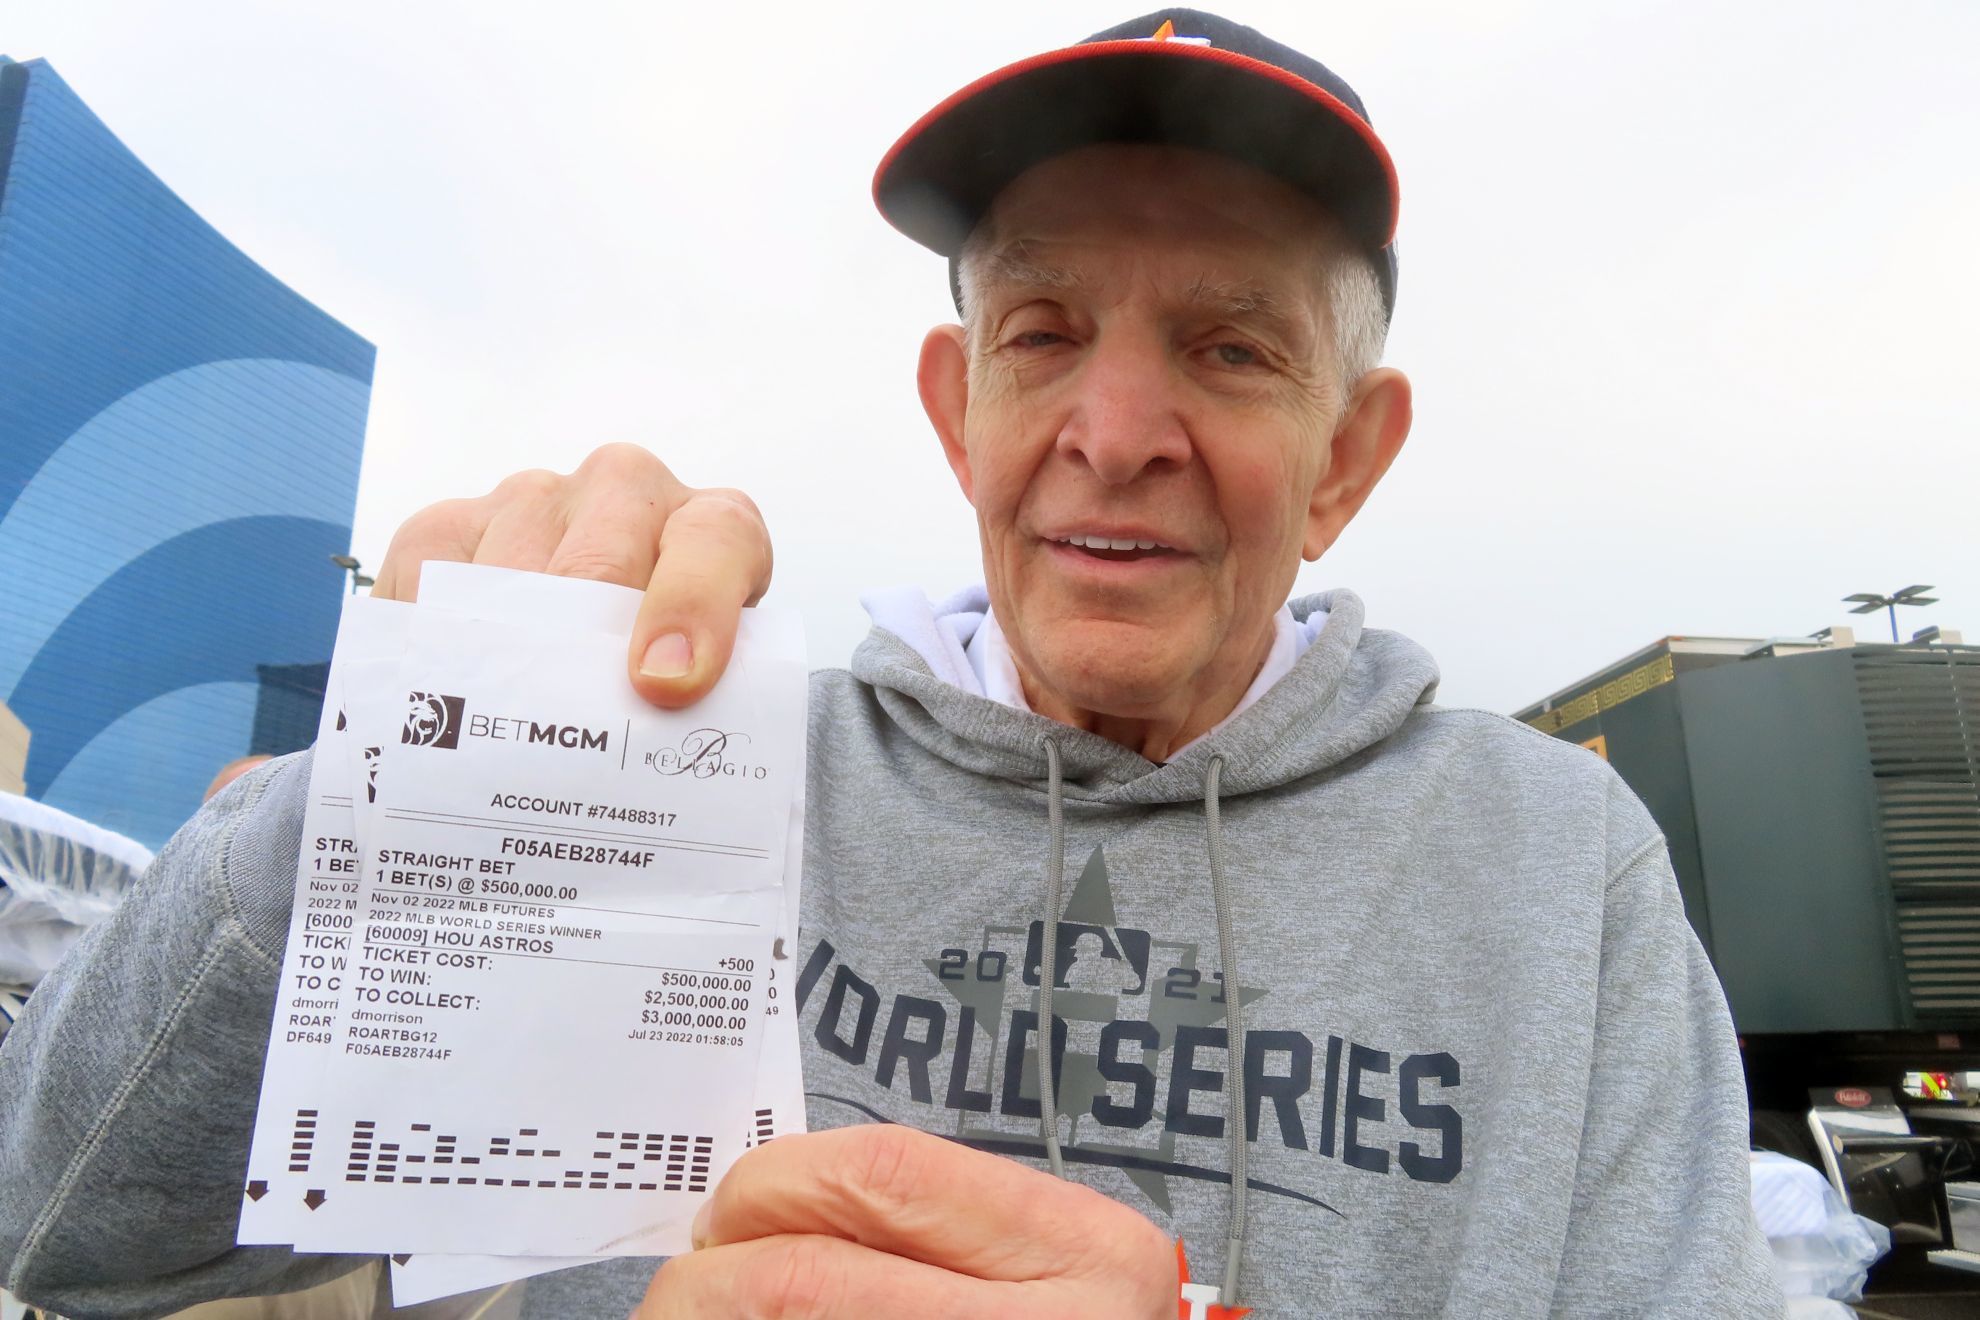 Mattress Mack Bets: What have been the businessman's biggest losses in betting?